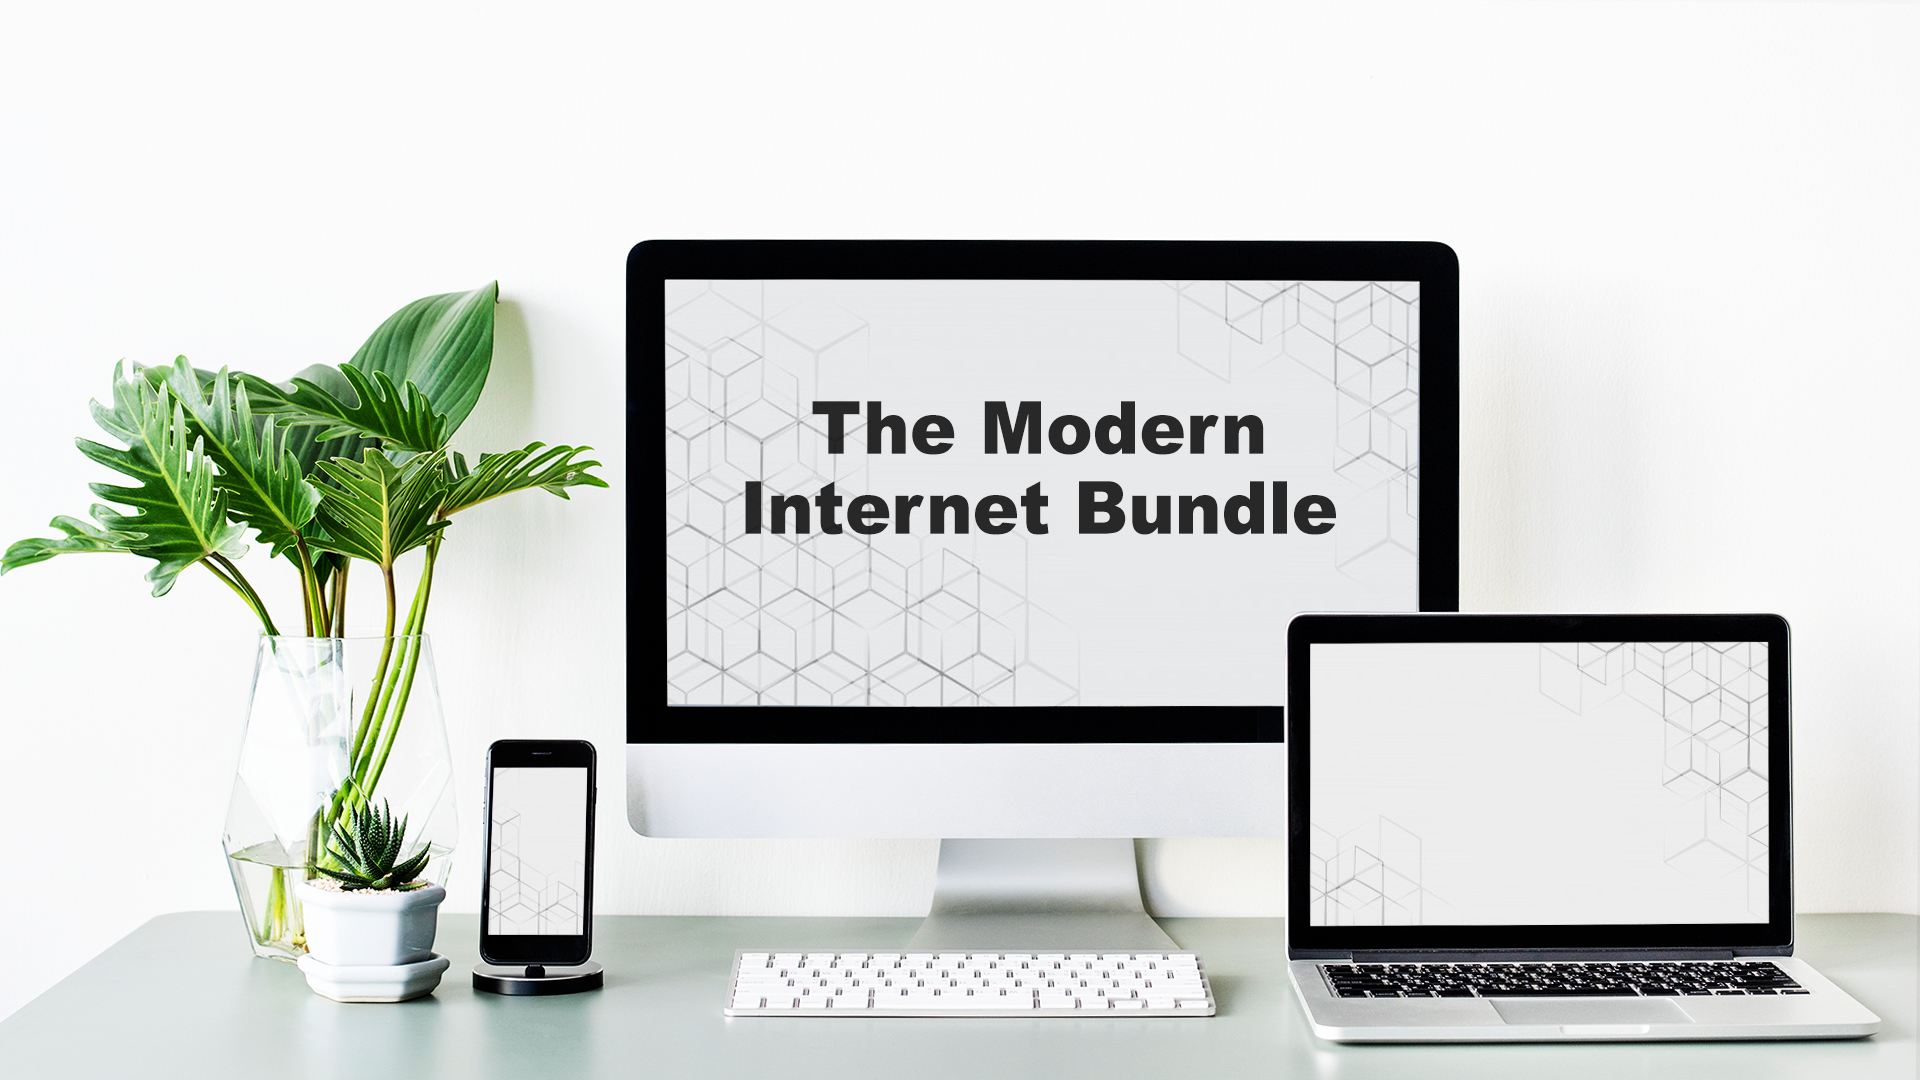 The modern Internet bundle is right at your fingertips